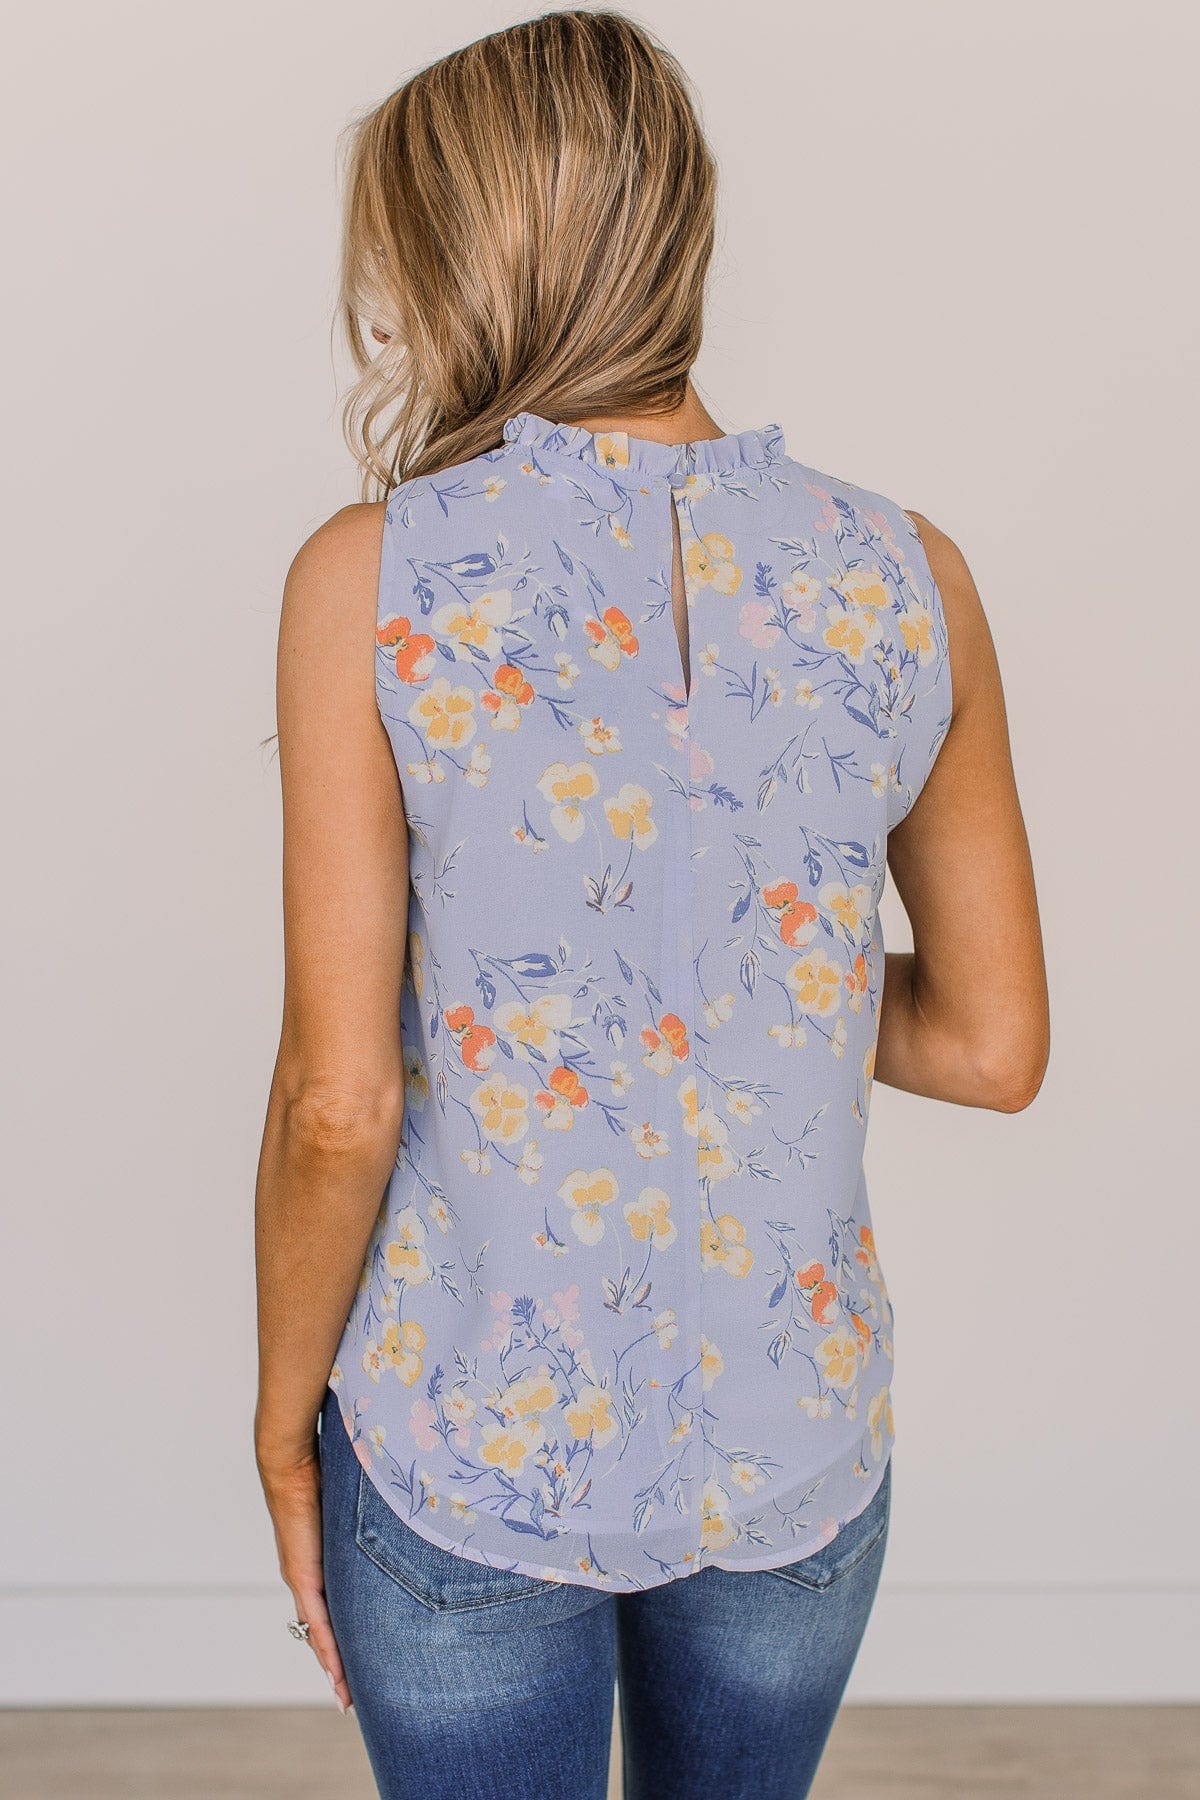 Seek You Out Floral Sleeveless Blouse- Blue